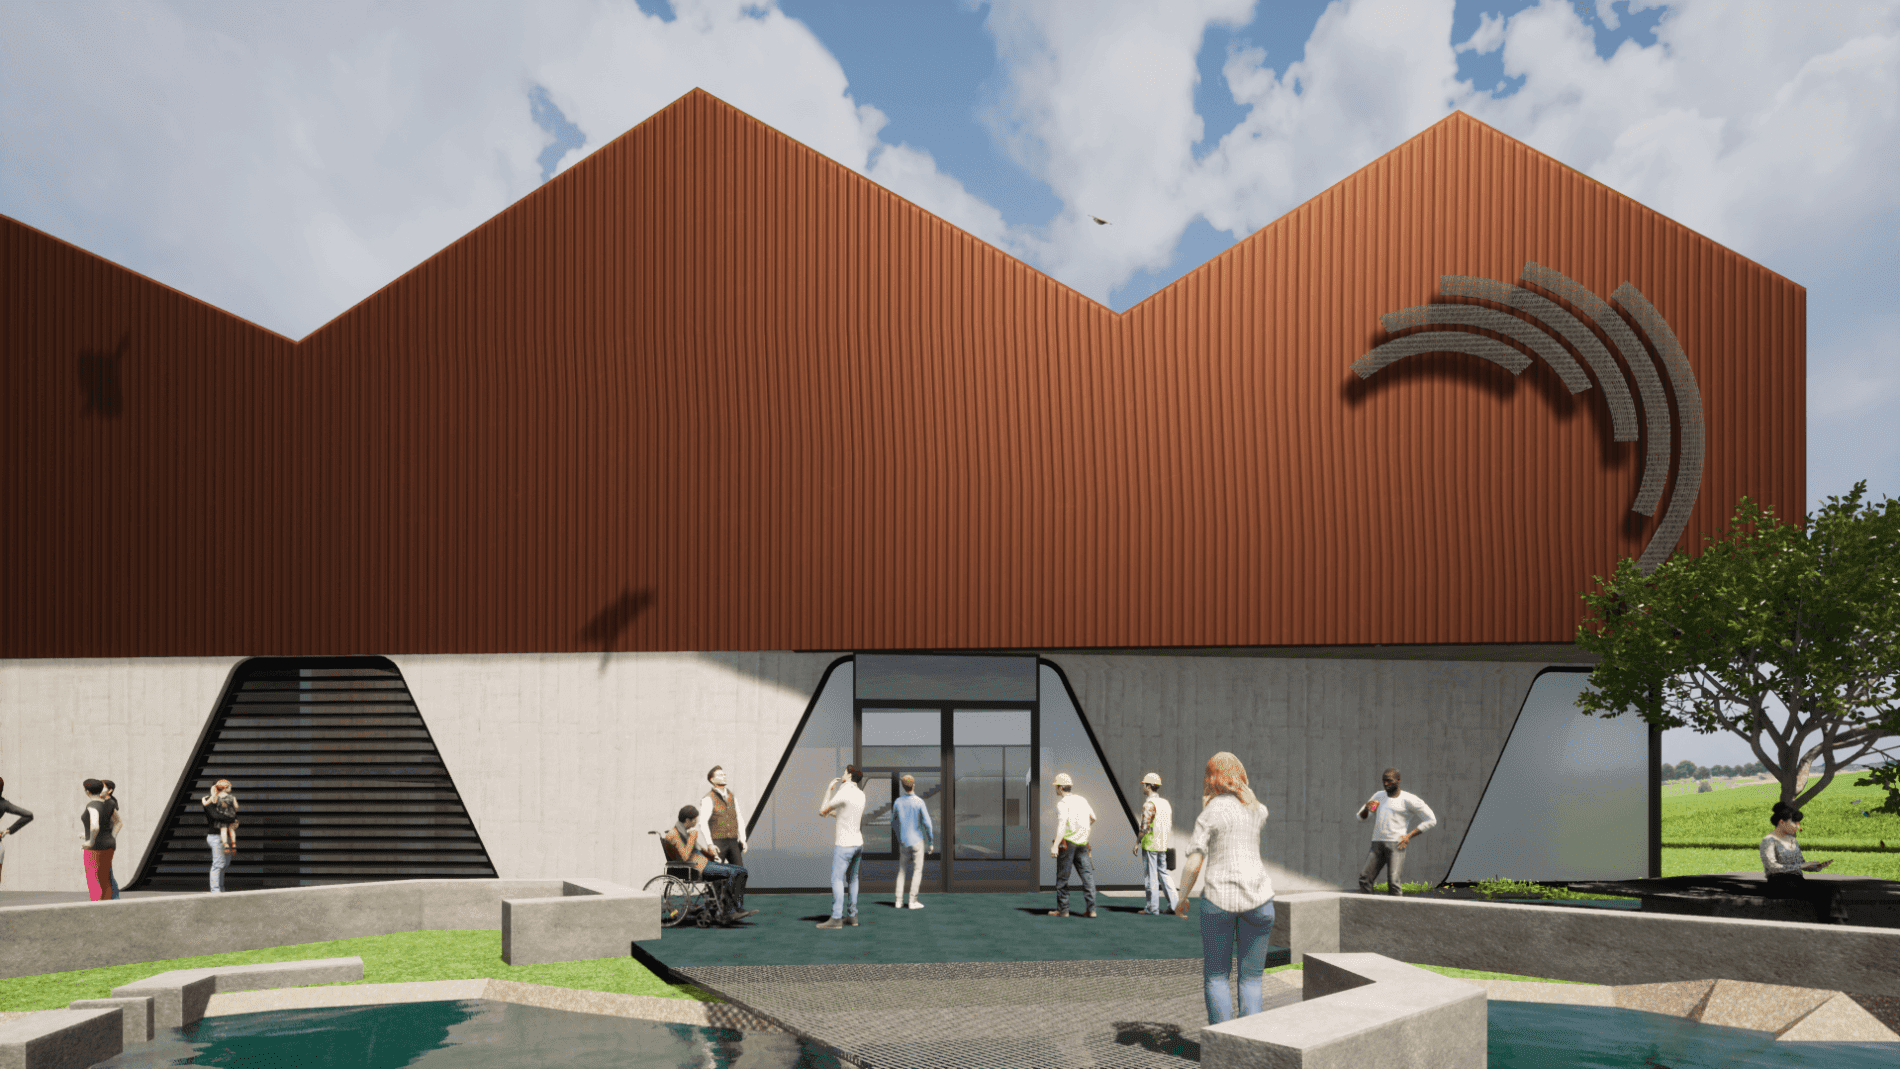 Artist's impression of a boxy saw-tooth metal clad training facility with concrete landscaping in the forecourt